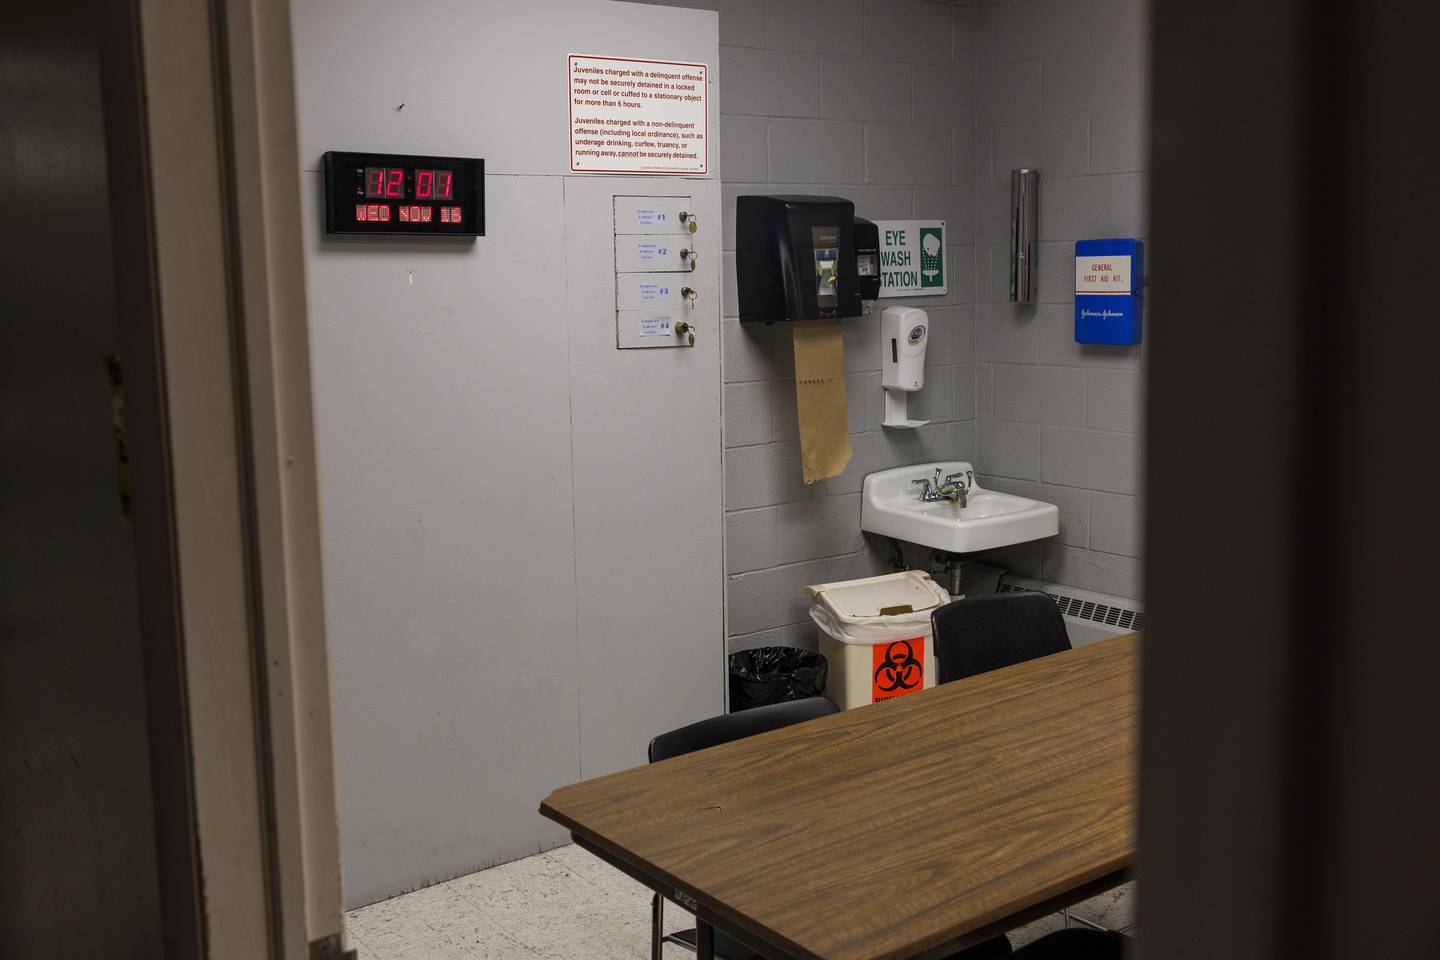 Jacksonville police bring the Garrison School students they arrest to this booking area at the police station to be fingerprinted and photographed. Students often wait in the room for a guardian to pick them up.